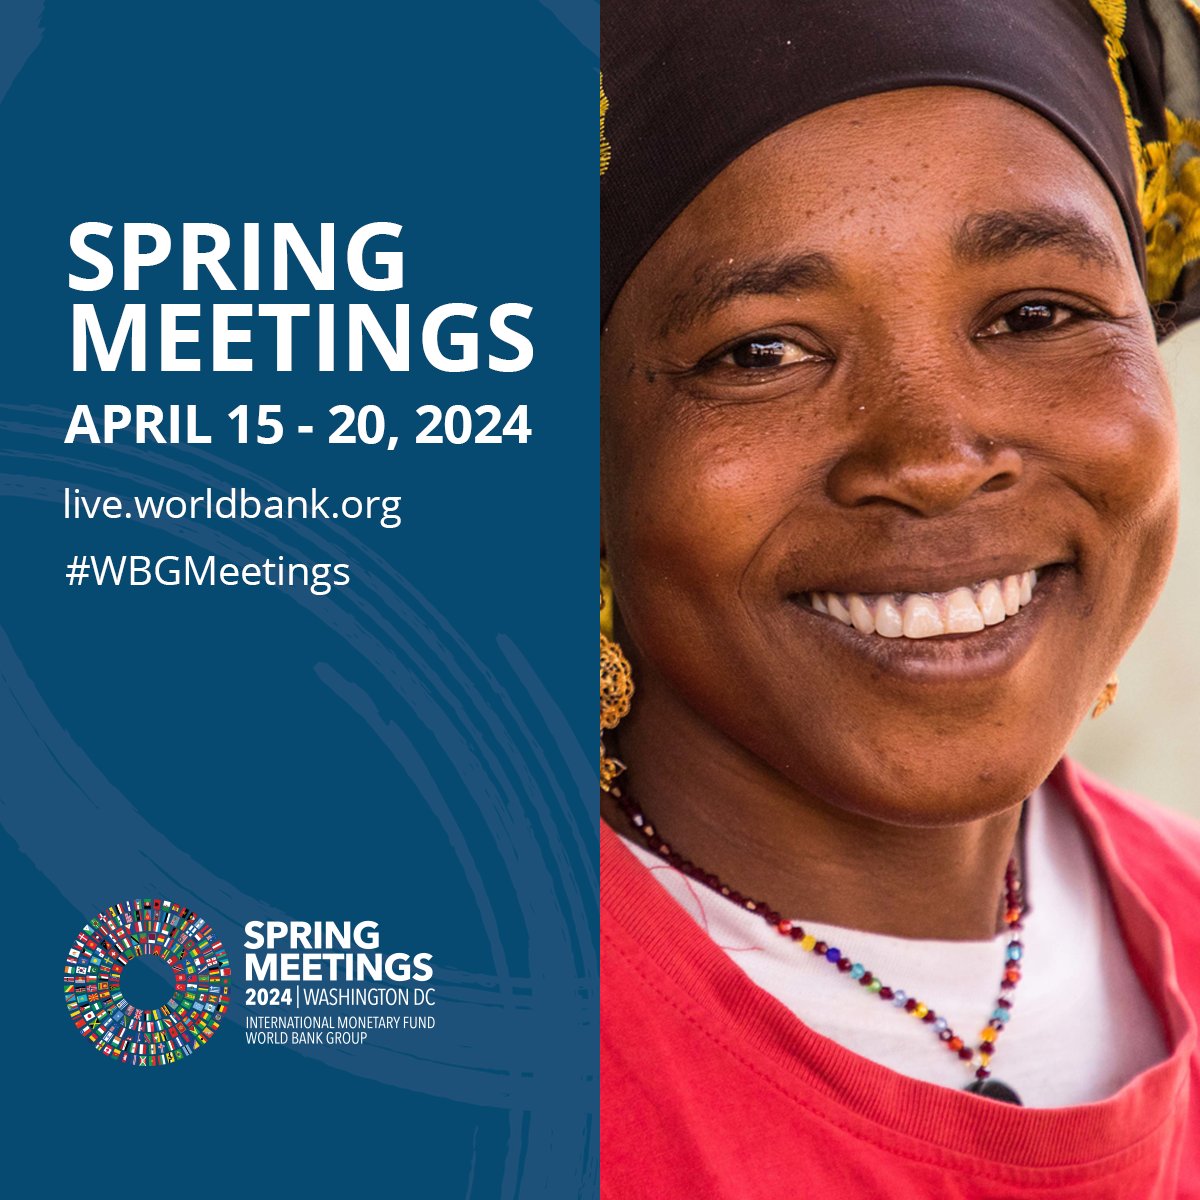 The #WBGMeetings offer a unique opportunity to interact with gov't officials, private sector, youth leaders & development experts & more! Watch our live events on April 17 & 18: wrld.bg/8qbq50RbCpC